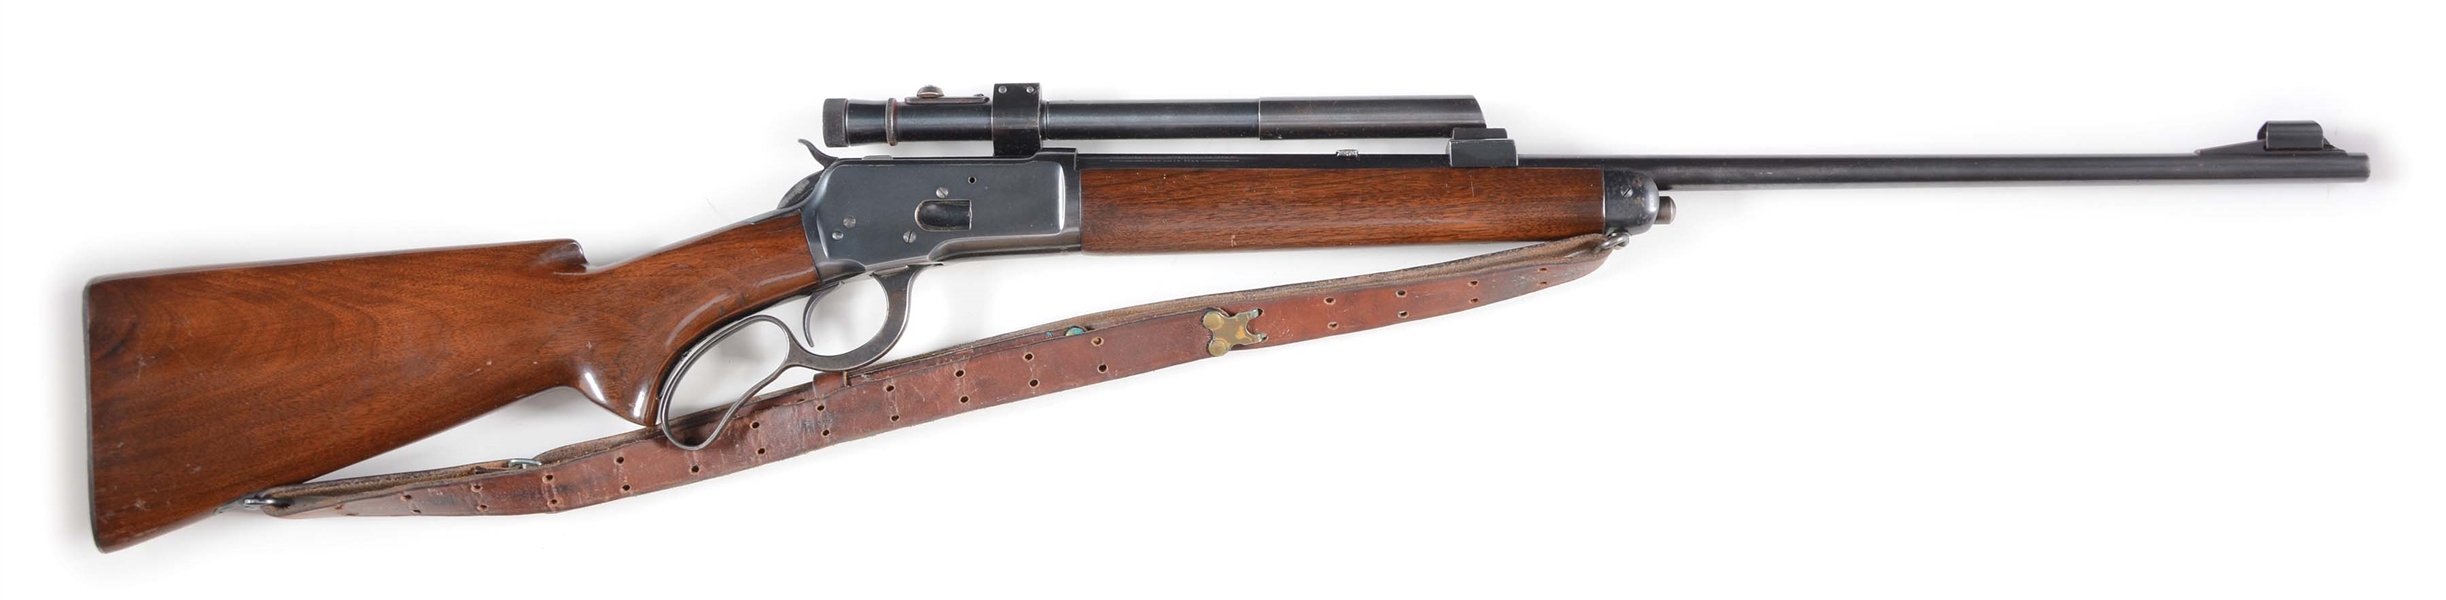 (C) WINCHESTER 65 LEVER ACTION RIFLE WITH SCOPE.